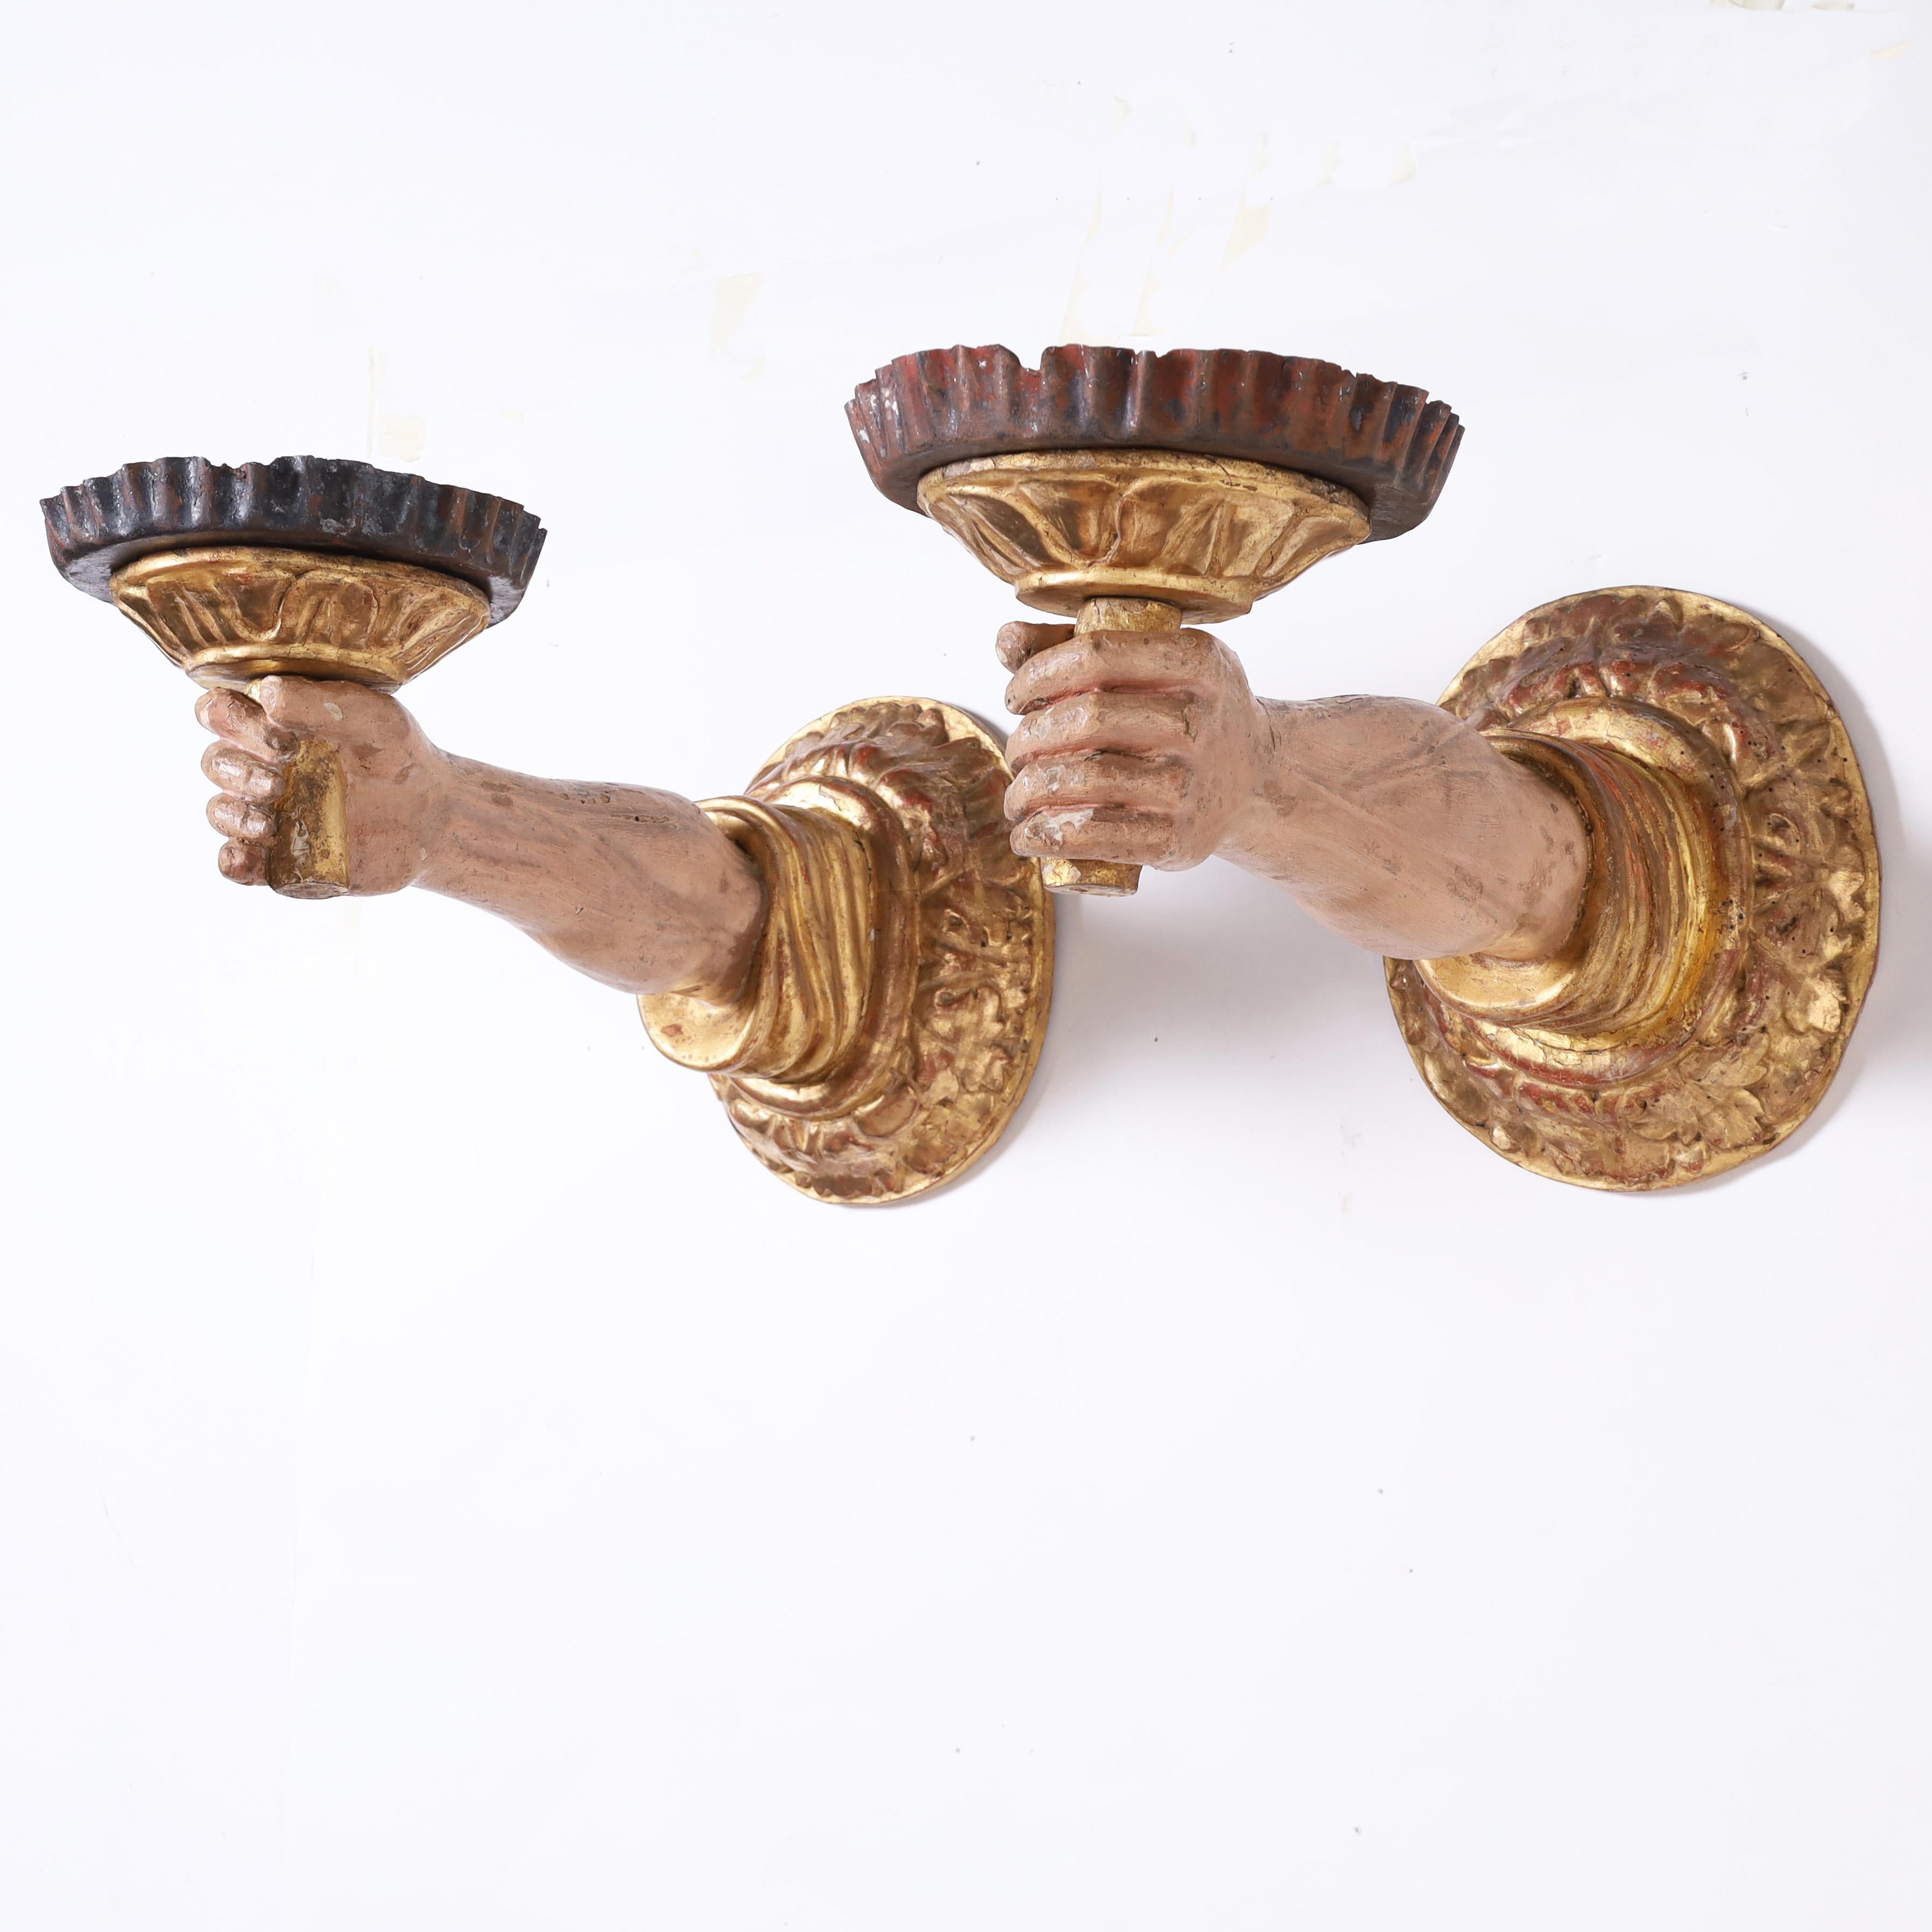 French Baroque Pair of Antique Carved Wood Arm and Fist Wall Sconce Candle Holders For Sale